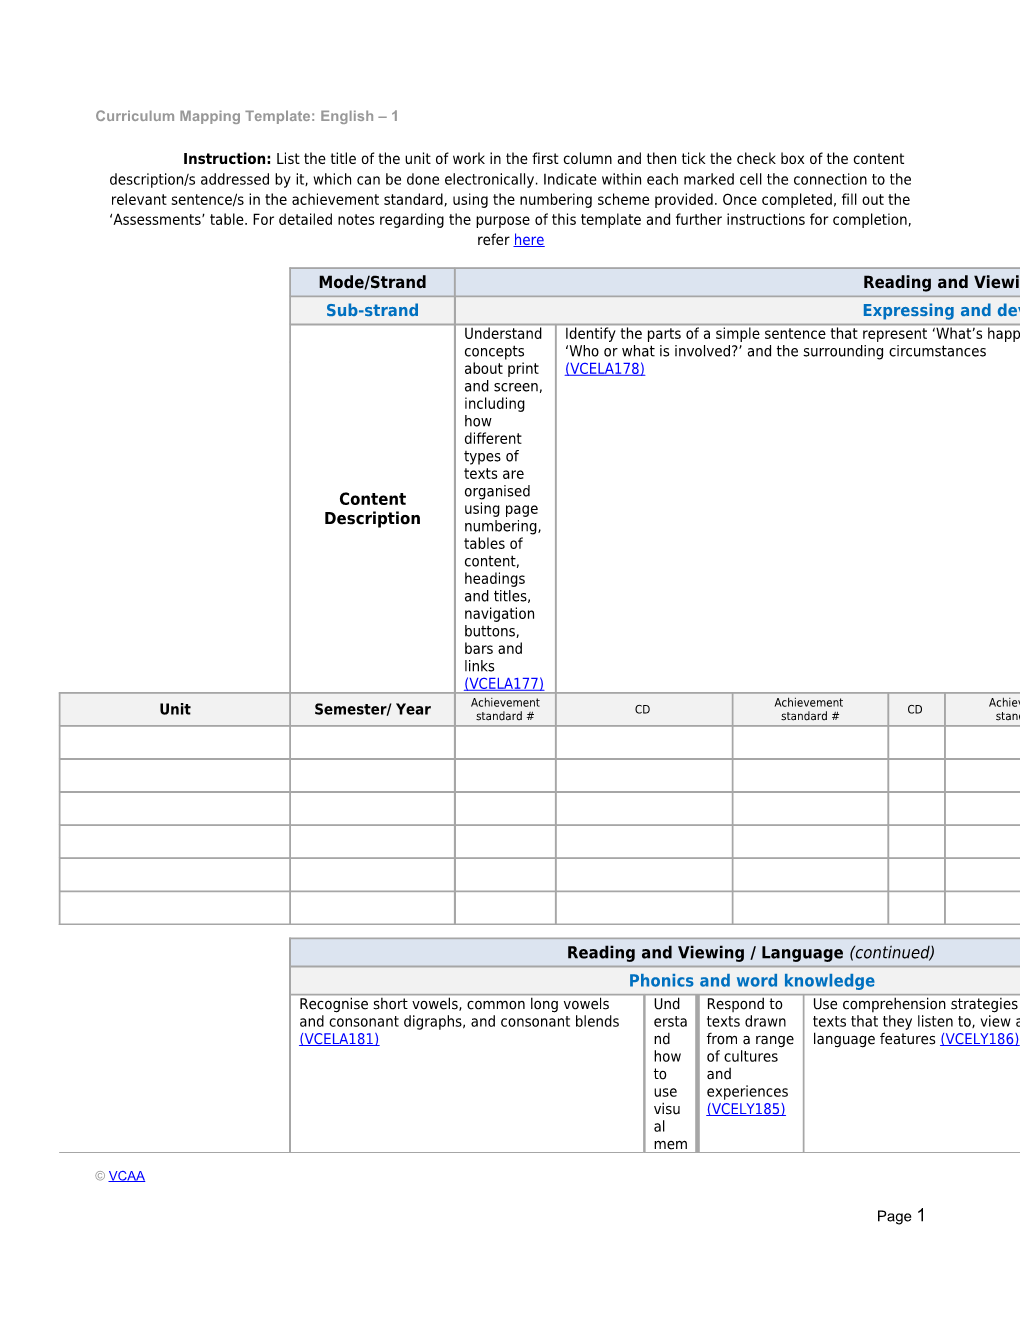 Curriculum Mapping Template: English 1